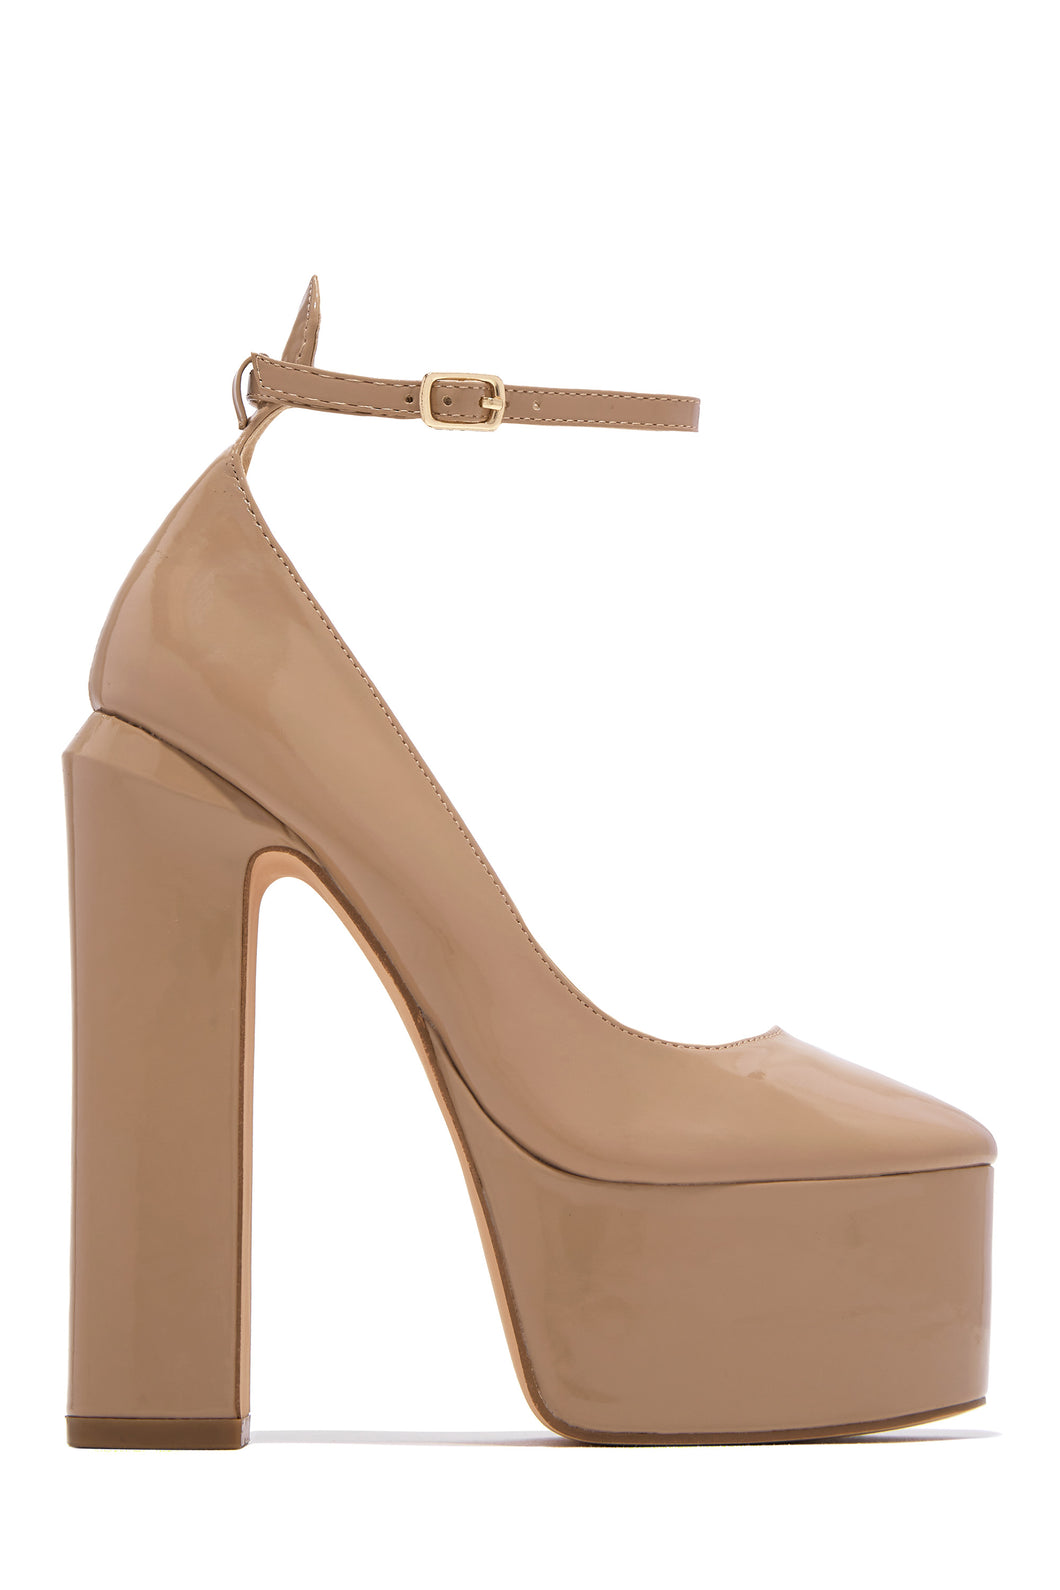 Nude Patent High Block Heels with Platform Sole